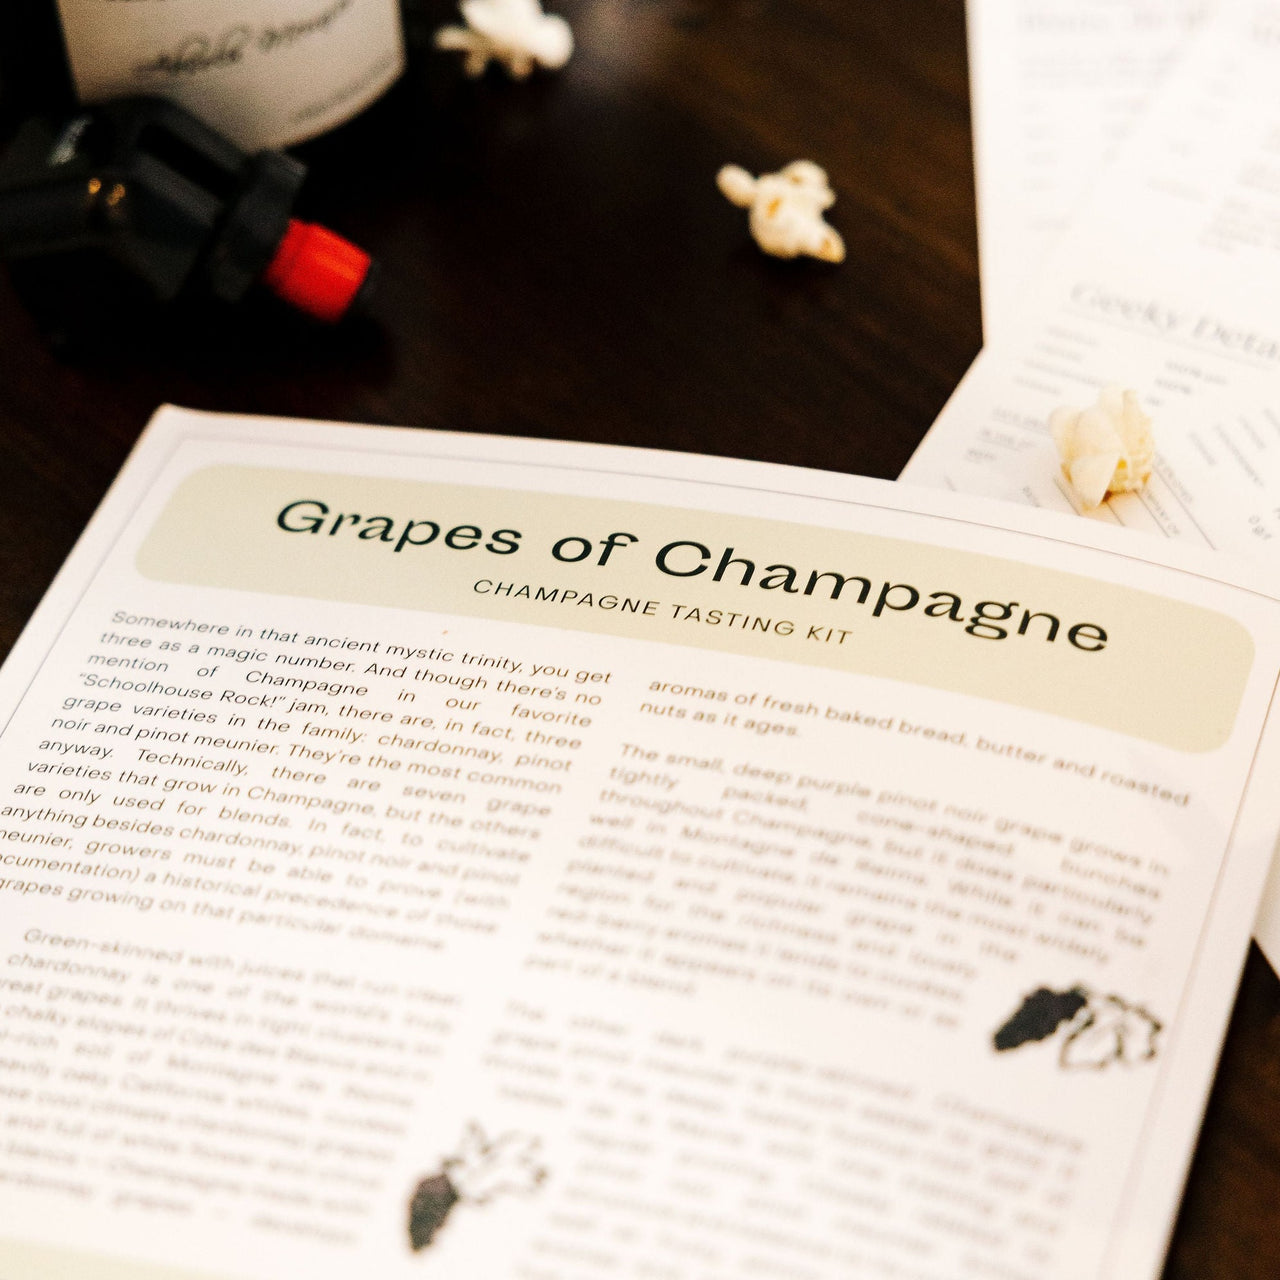 Grapes of Champagne (3 bottles)